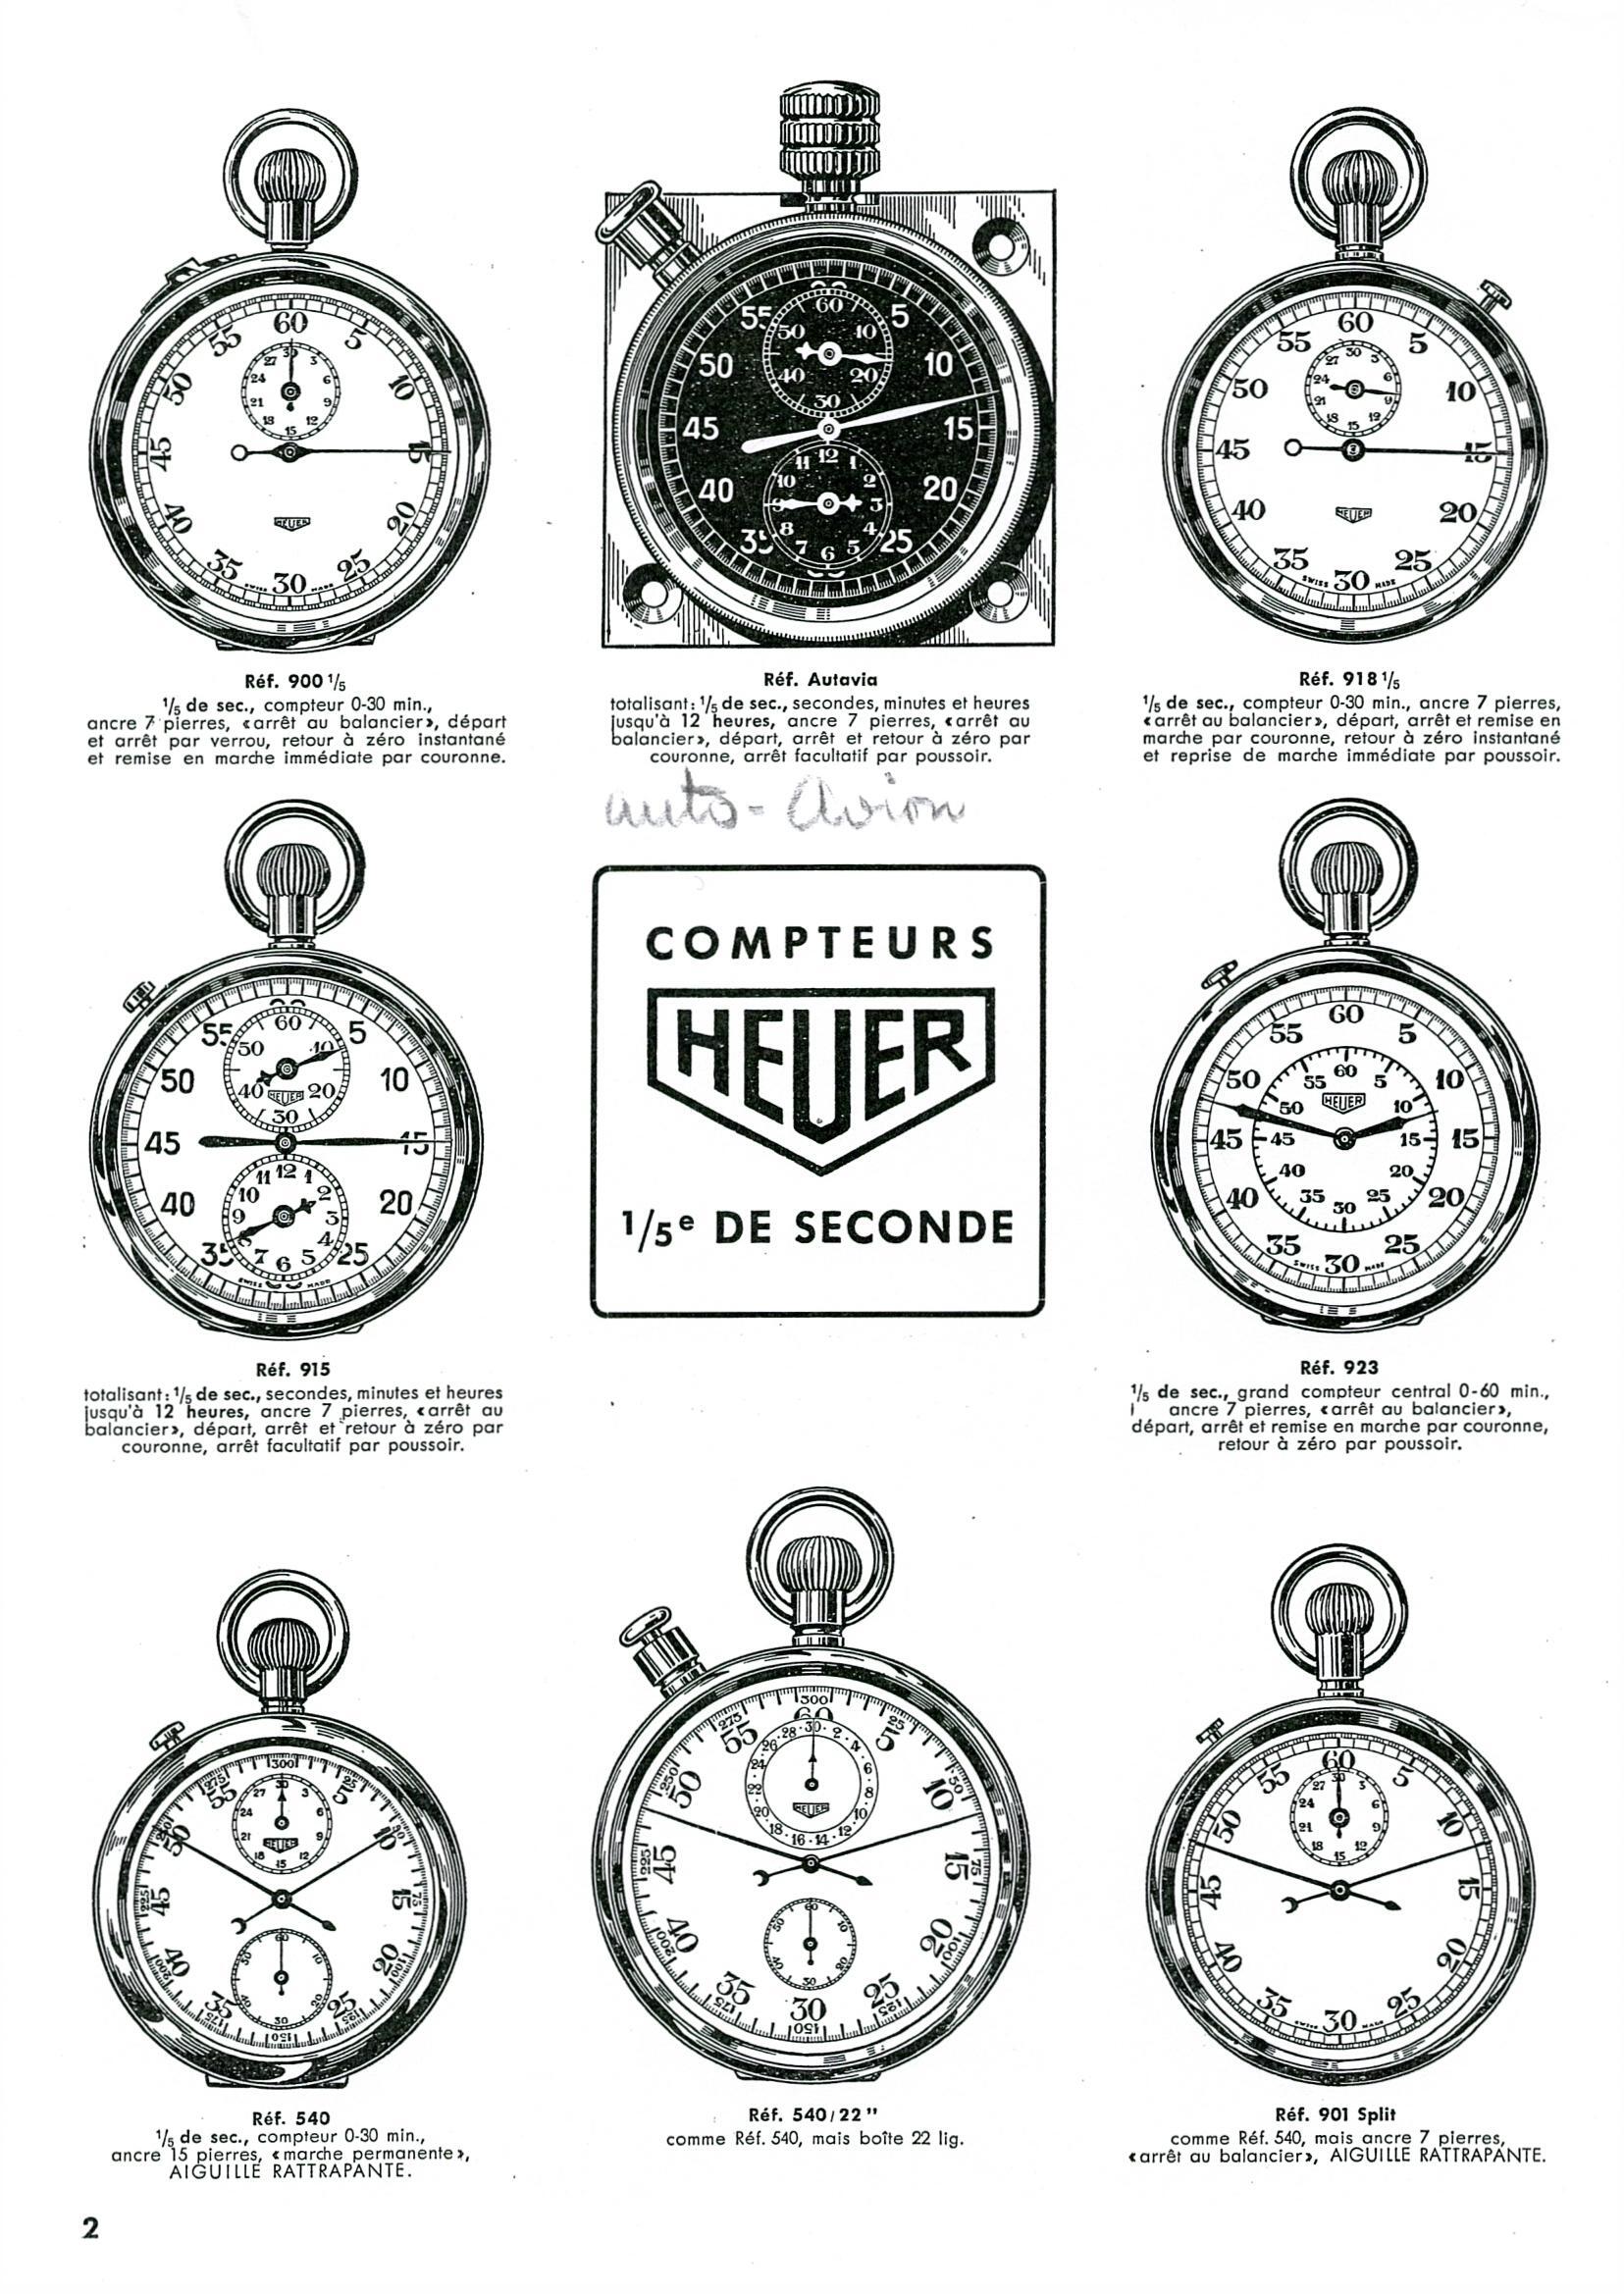 Porsche and TAG Heuer Archive Images